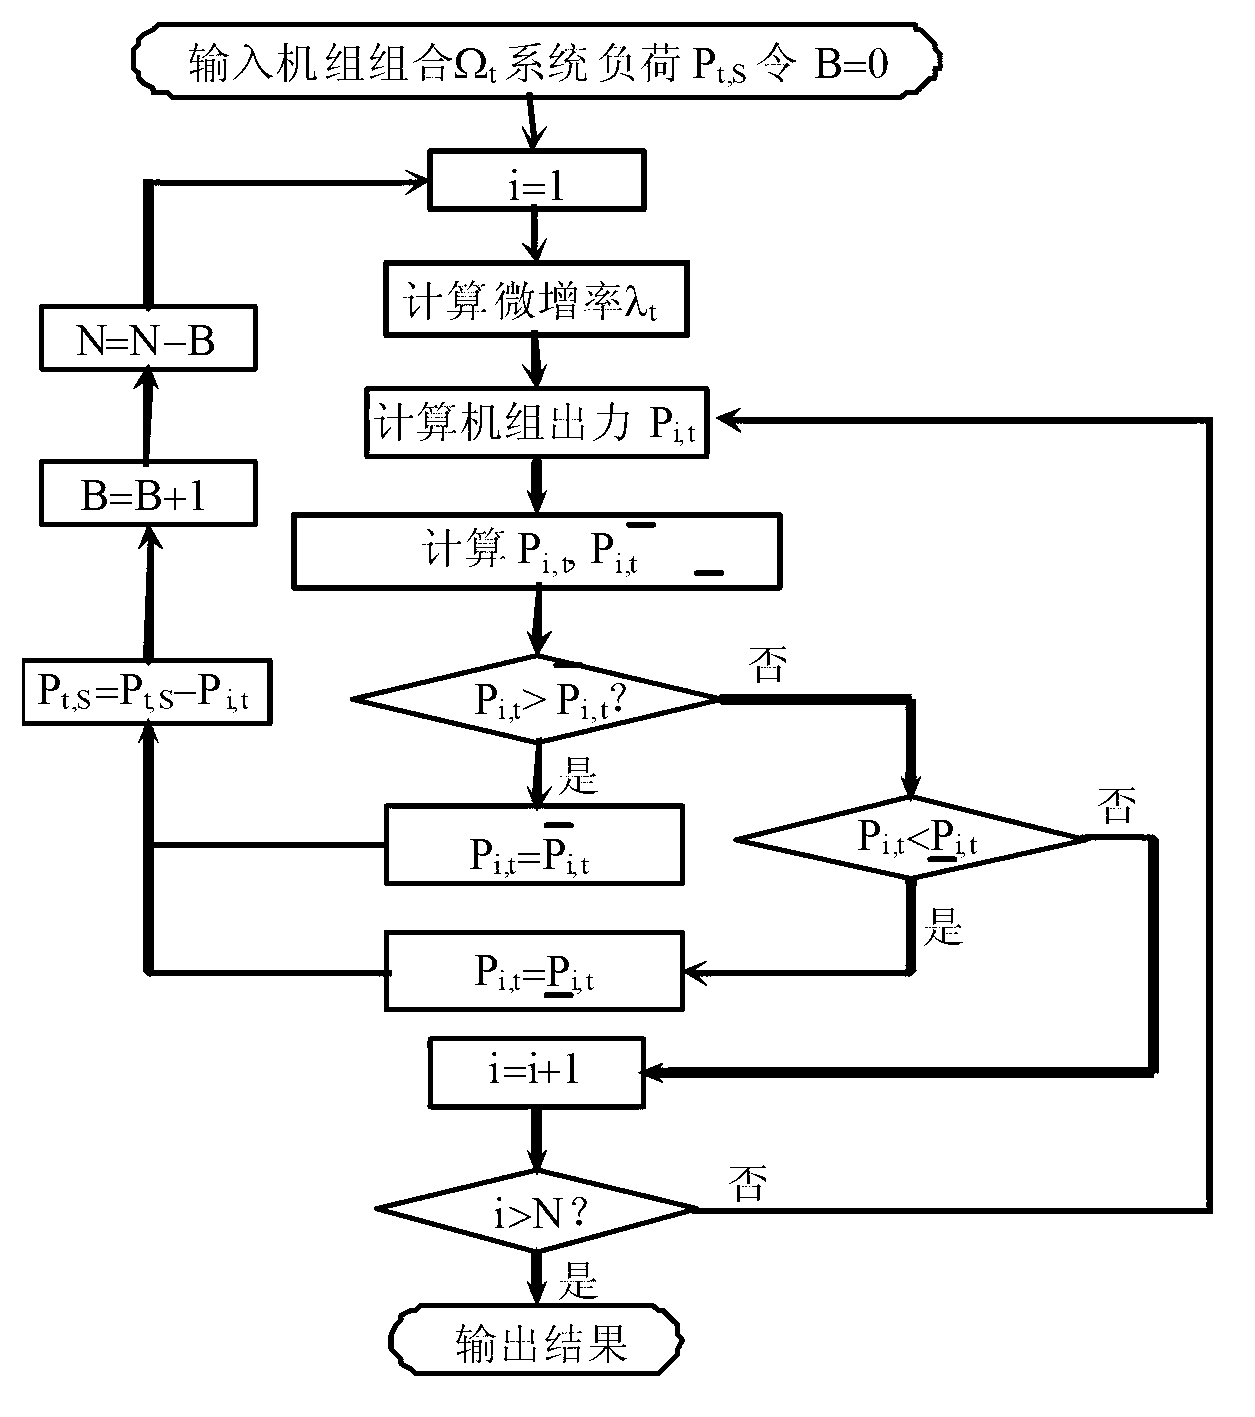 Energy-saving method for distributing load for thermal power generating units by combining dynamic unit combination with equation incremental rate